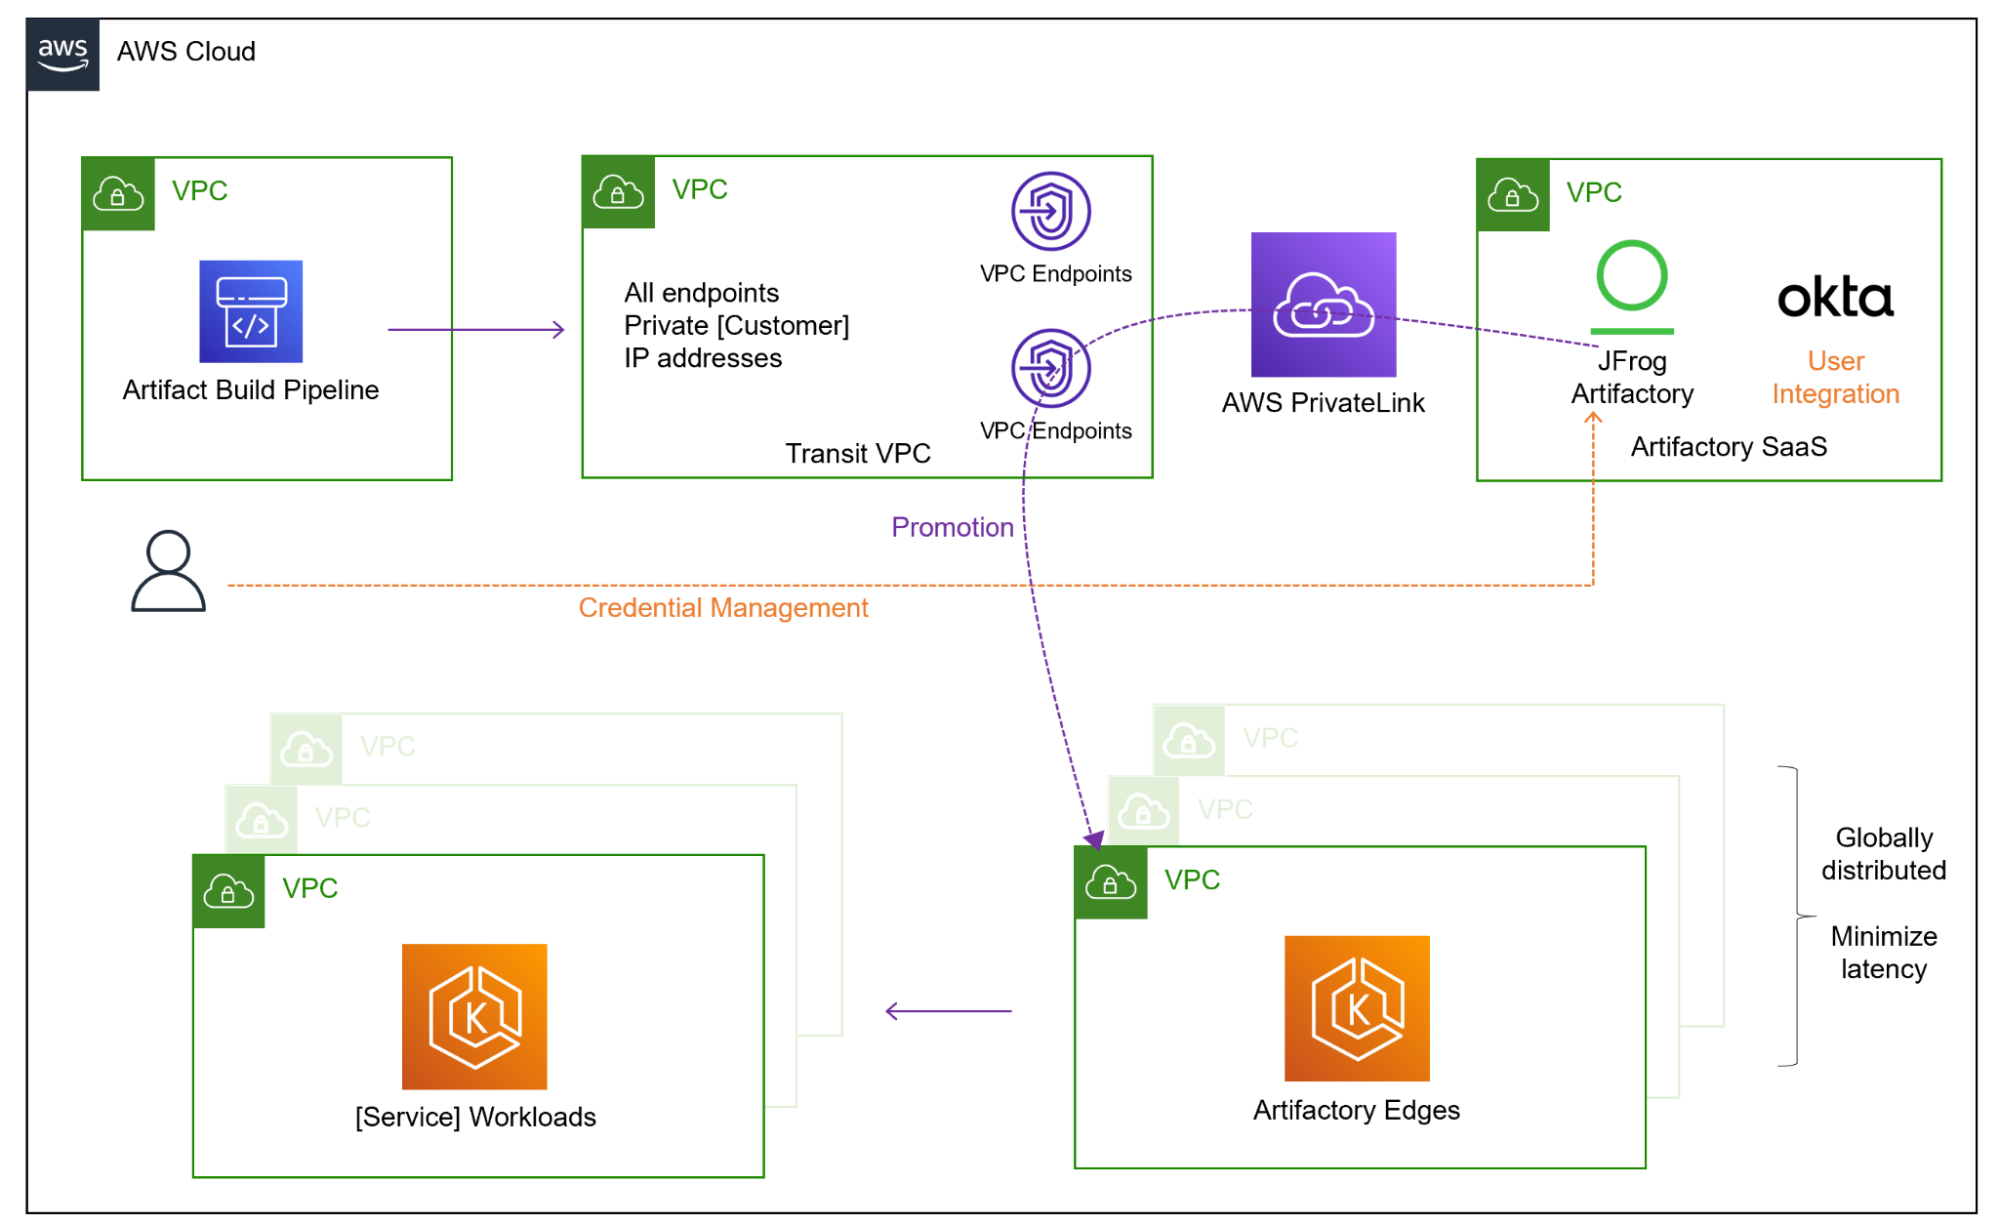 AWS JFrog PrivateLink reference architecture